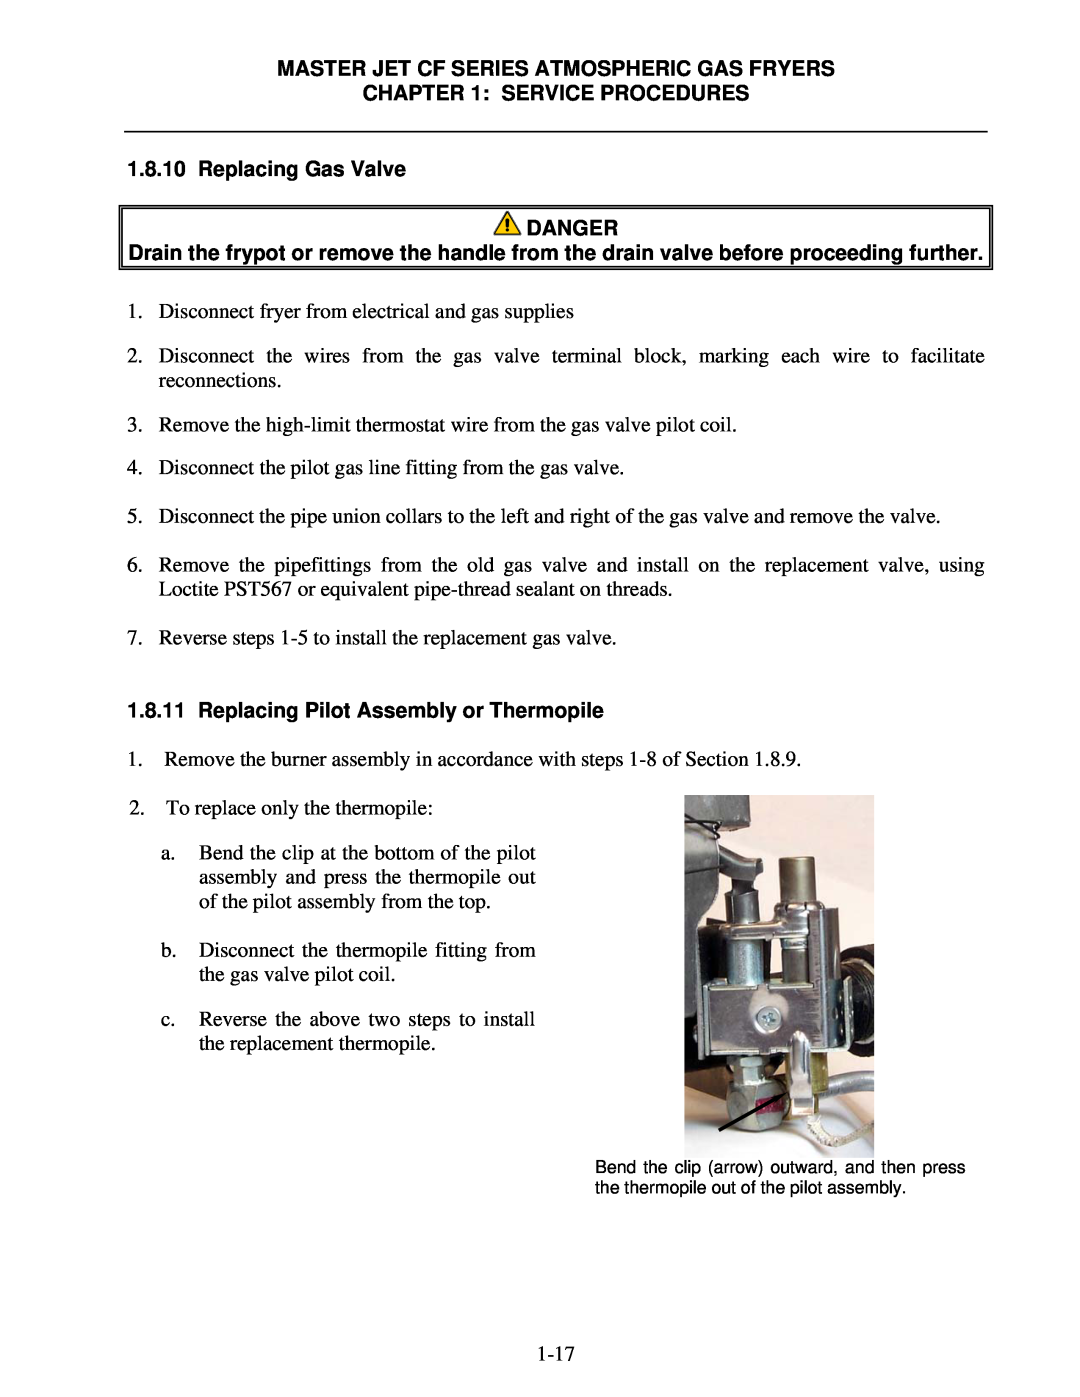 Frymaster MJCFEC, FMCFEC SERVICE PROCEDURES 1.8.10 Replacing Gas Valve DANGER, Replacing Pilot Assembly or Thermopile 